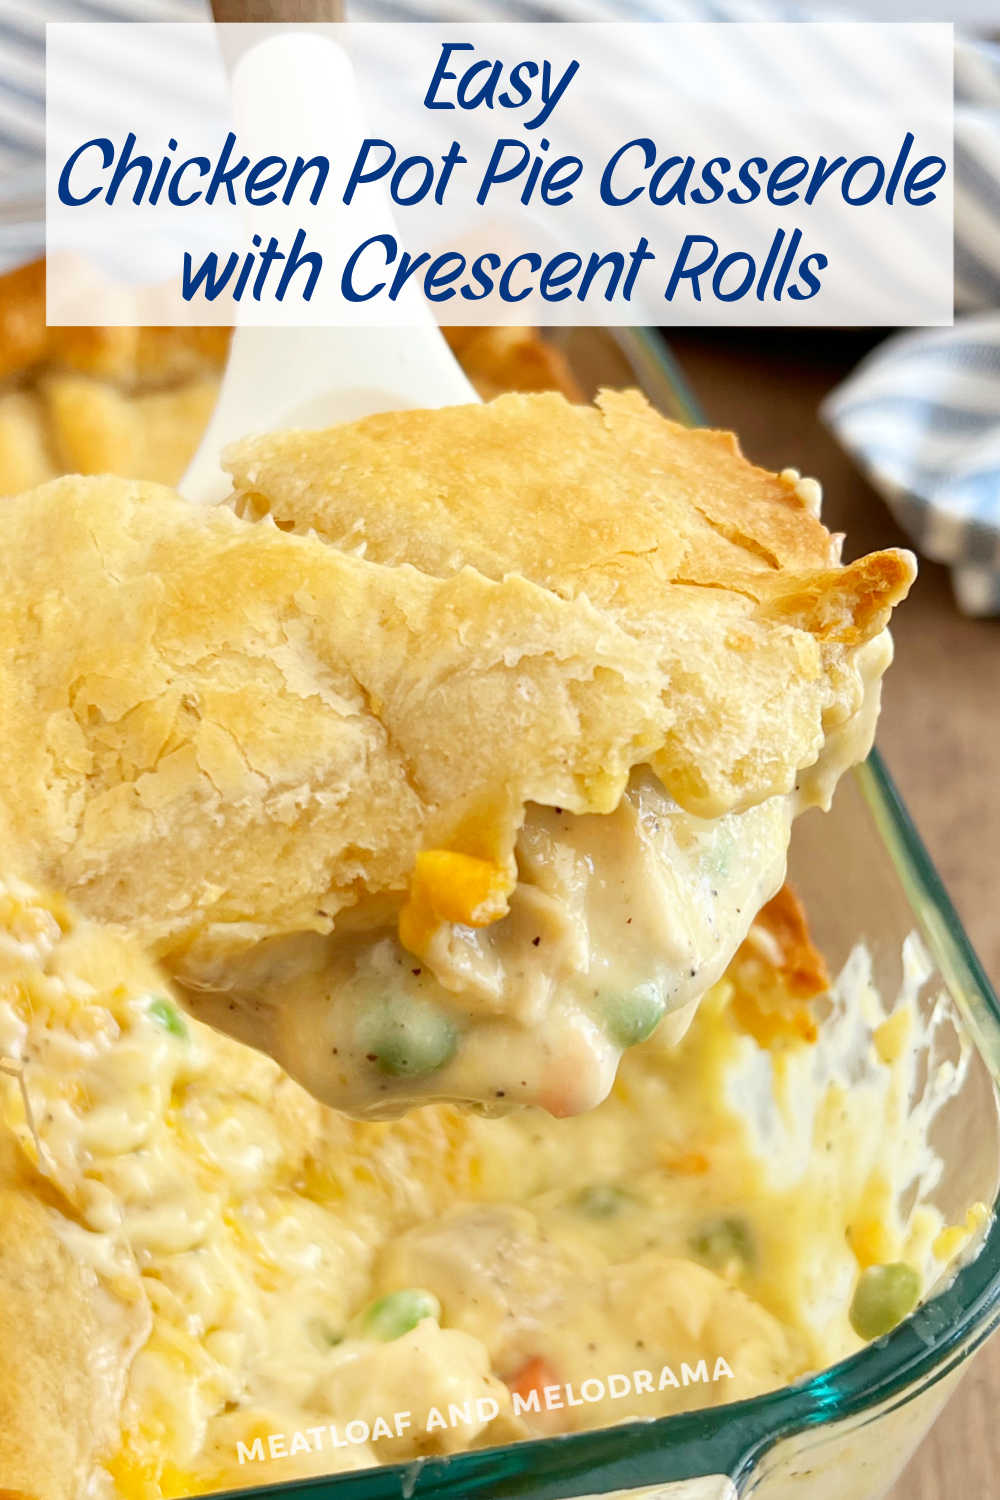 This Chicken Pot Pie Casserole with crescent rolls is an easy chicken pot pie recipe with rotisserie chicken and cream of chicken soup under a crescent roll crust.  Your entire family will love this easy recipe, and it's a great way to use up leftover chicken! via @meamel